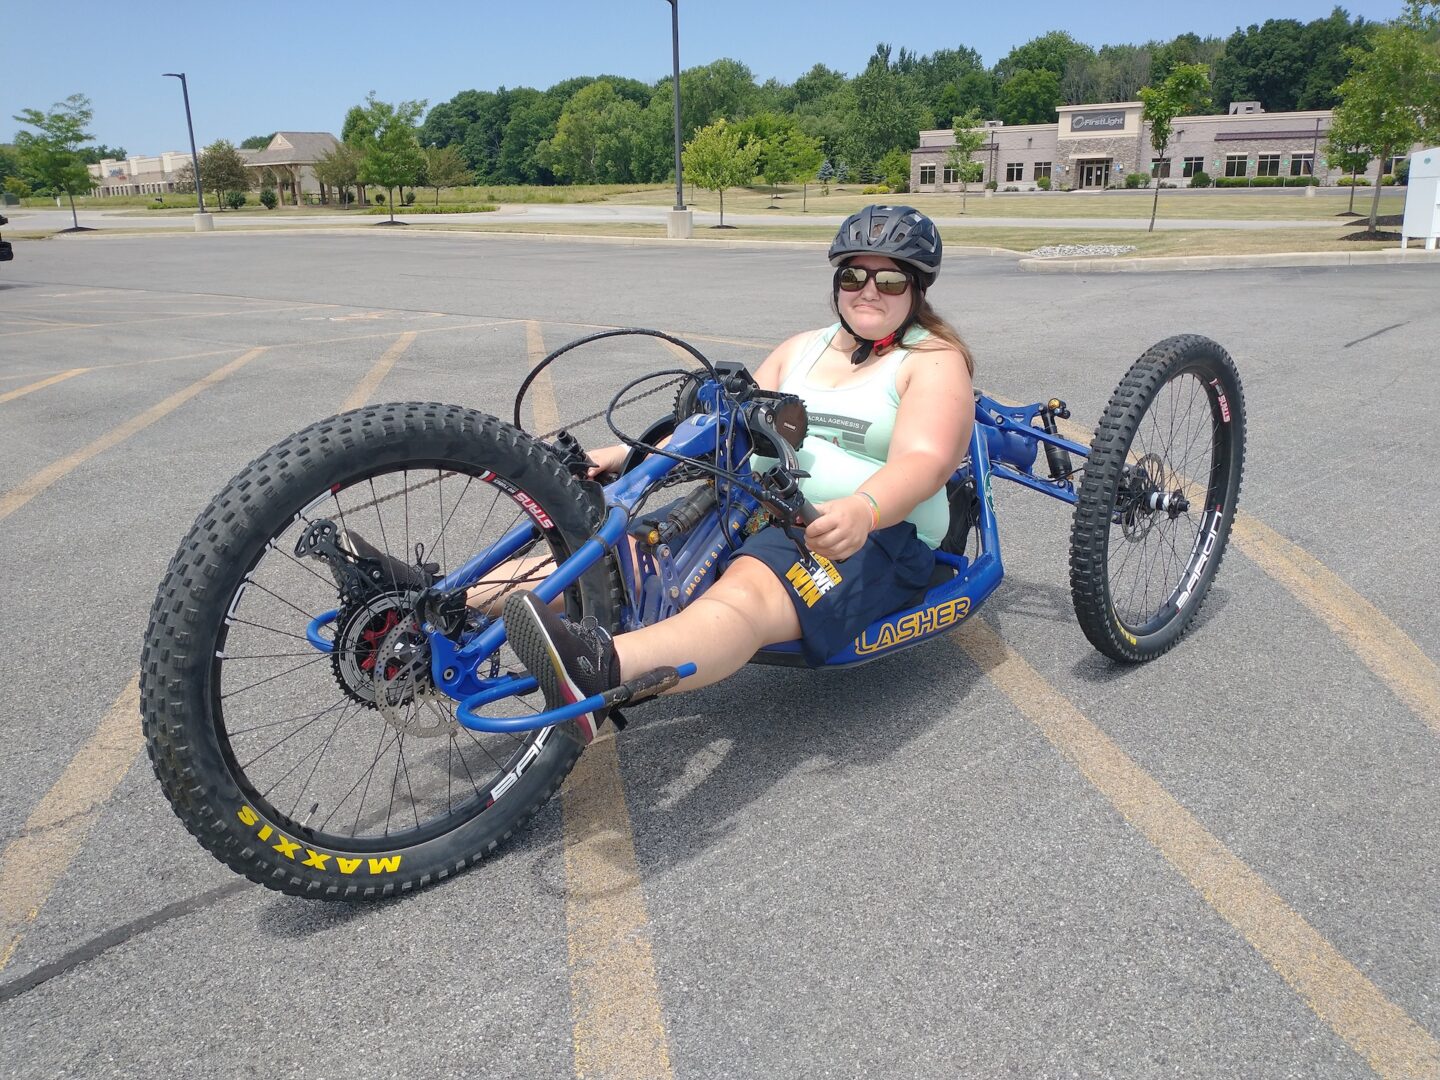 A woman sits on a hand-cranked adaptive mountain bike in a parking lot